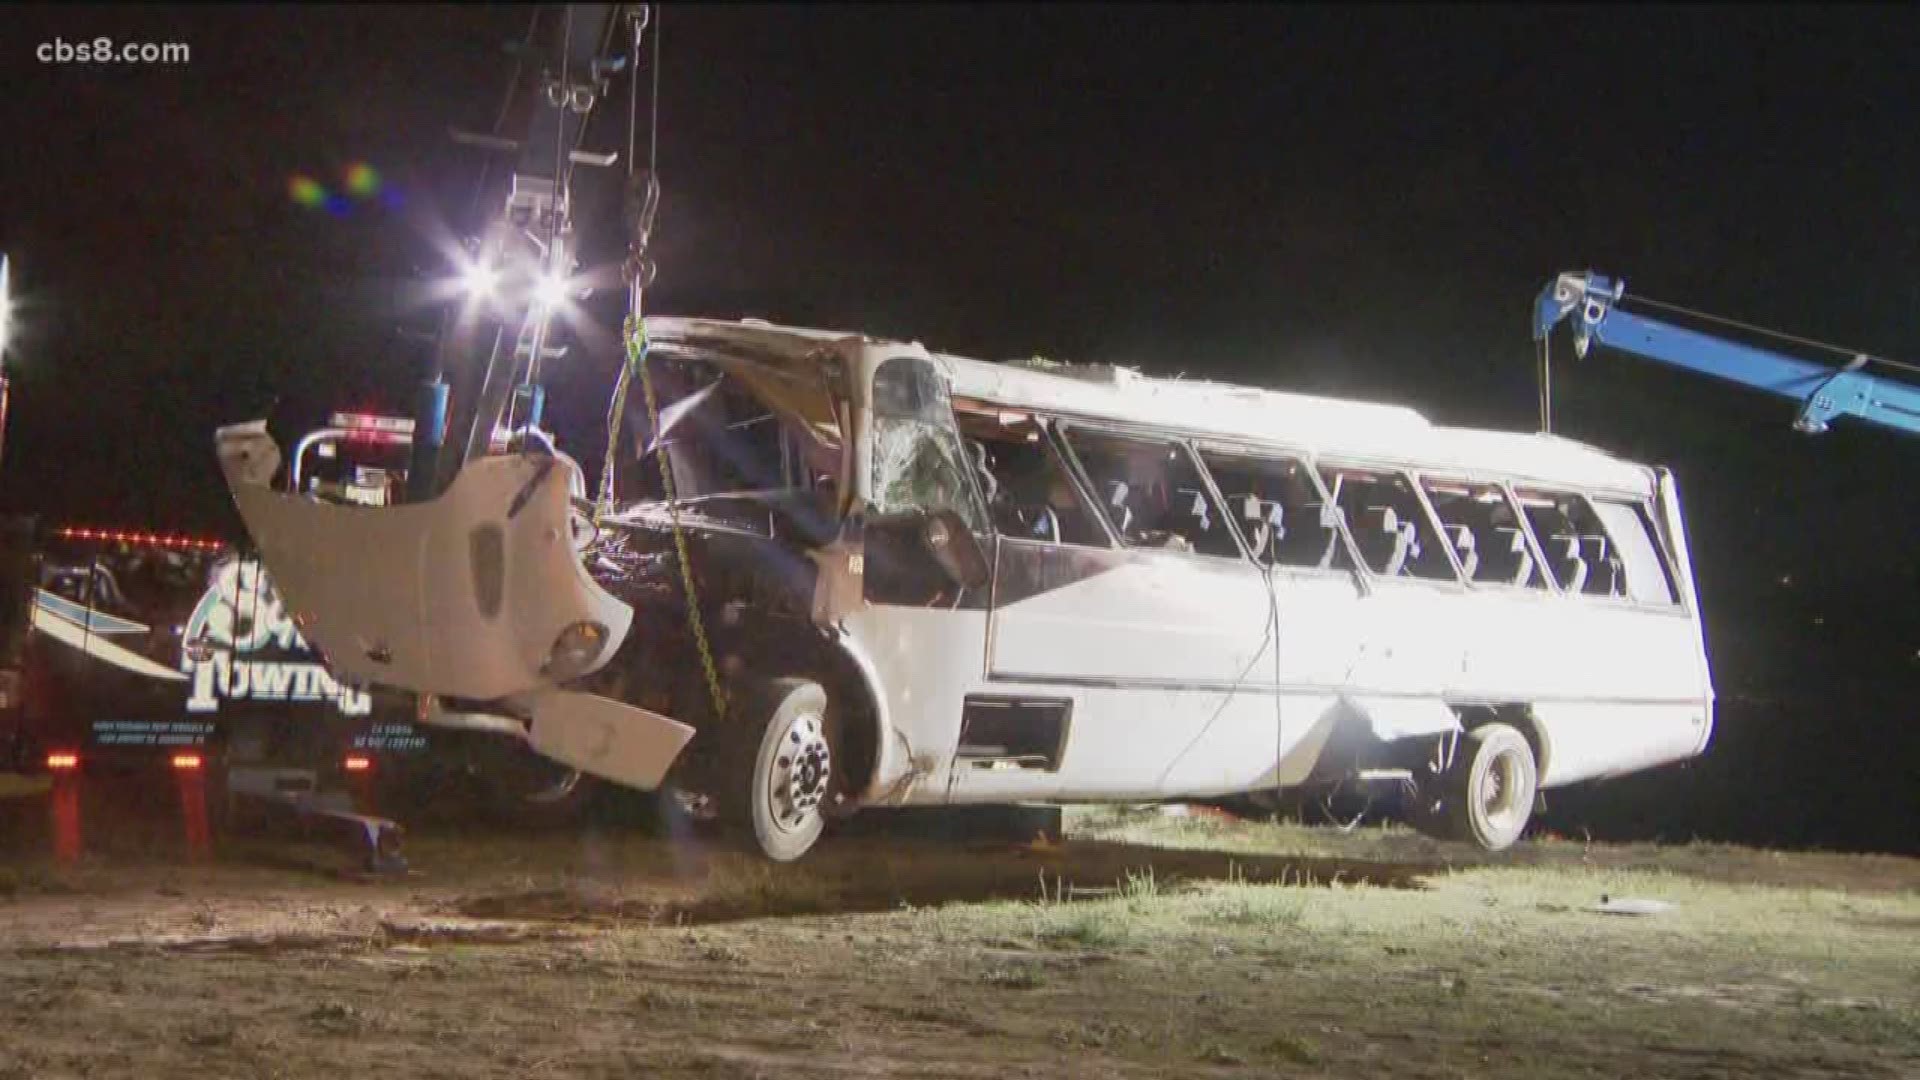 A 5-year-old boy critically injured in Saturday's deadly charter bus crash in Pala Mesa was airlifted to a Riverside County hospital Sunday, authorities said.